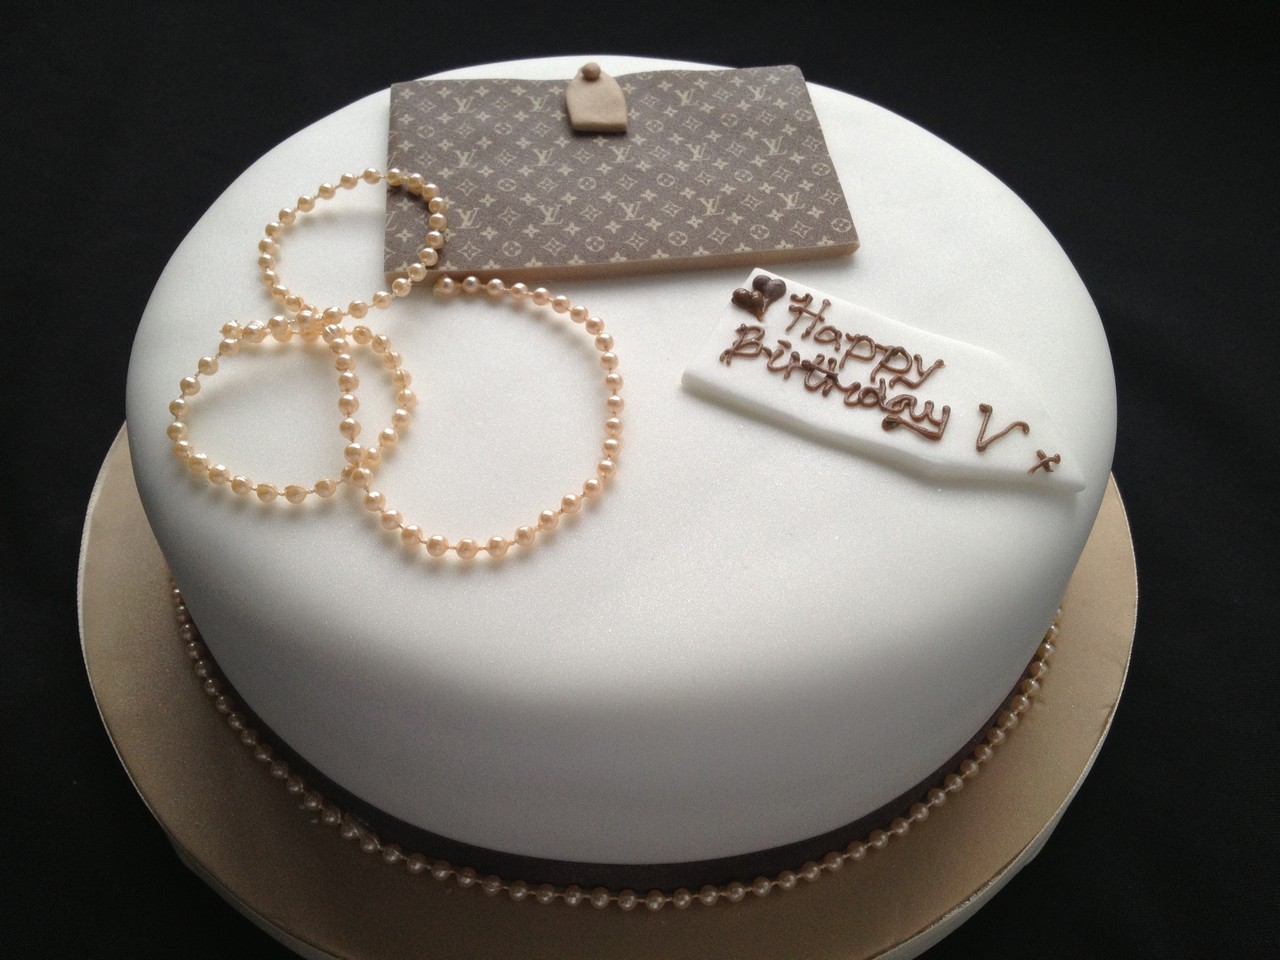 Purse and Pearls Cake | Novelty Cakes